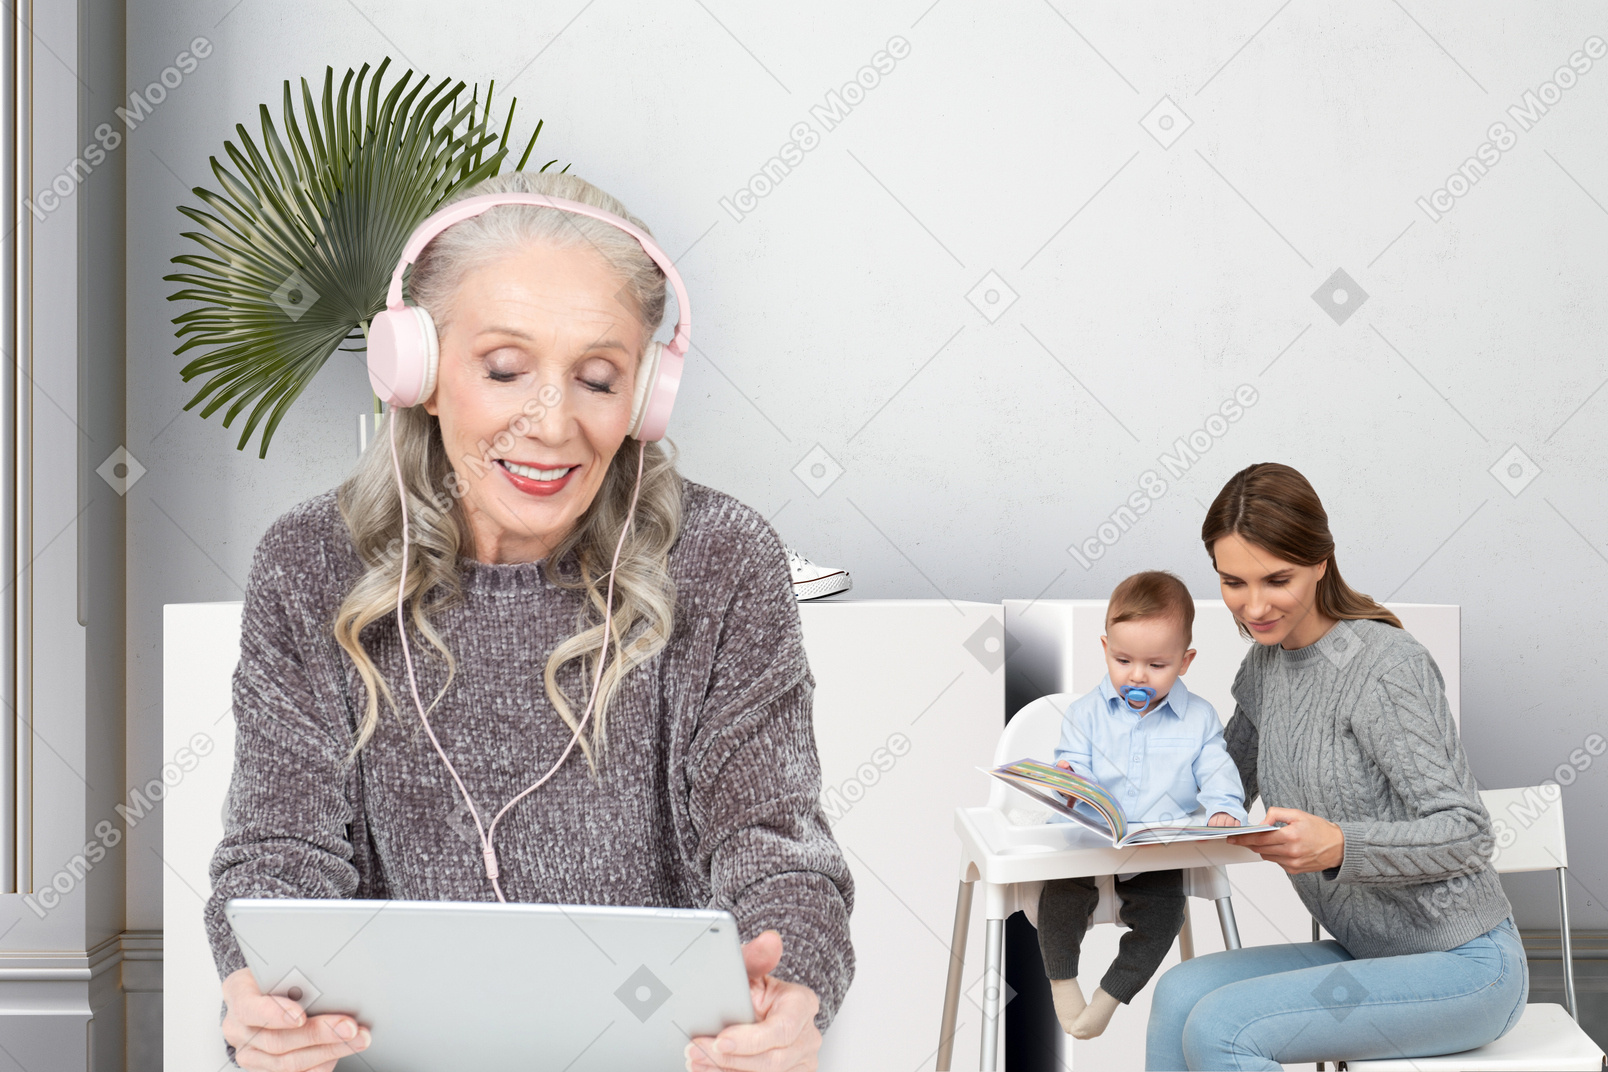 An elderly woman using a tablet while young woman reading a book to her baby